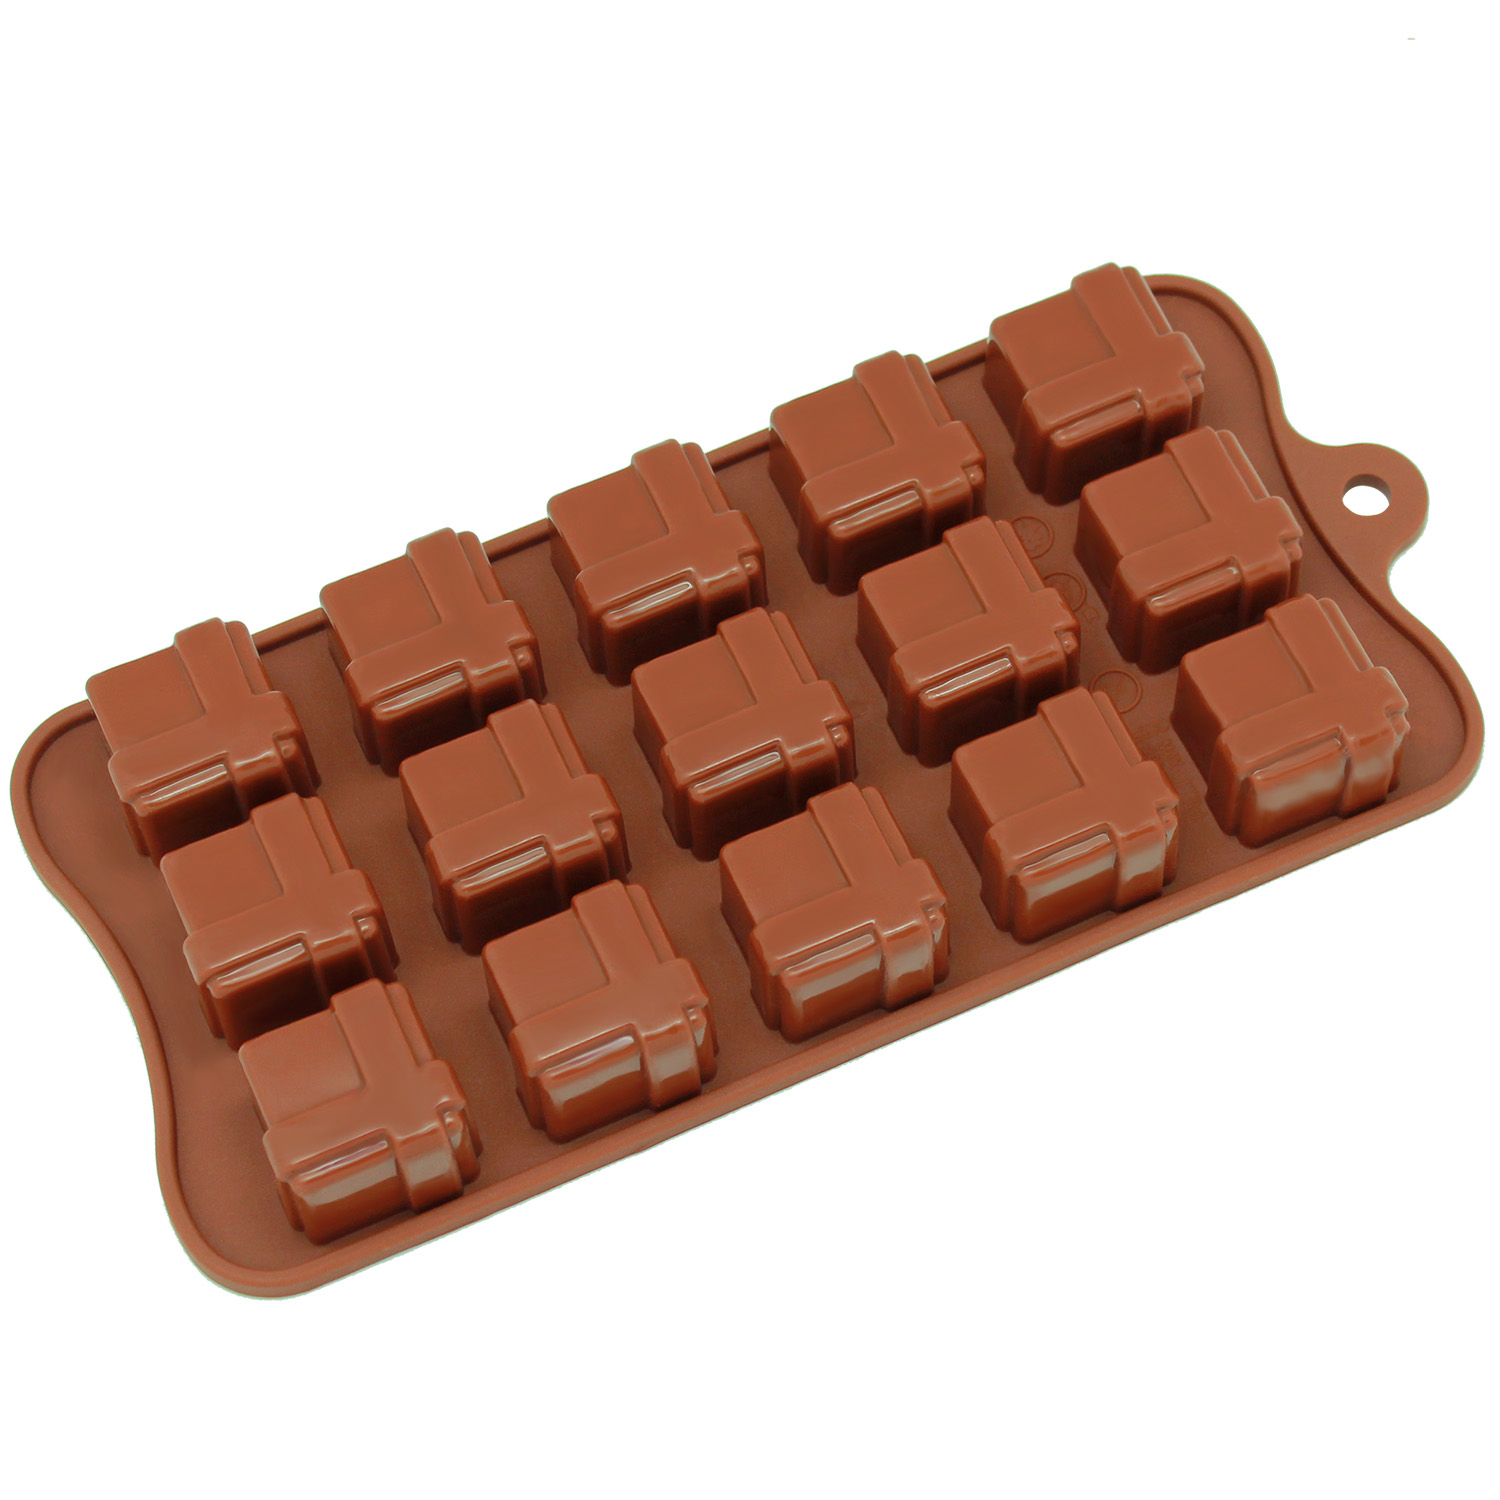 Freshware Silicone Mold, Chocolate Mold, Candy Mold, Ice Mold, Soap Mold for Chocolate, Candy and Gummy, Gift, 15-Cavity